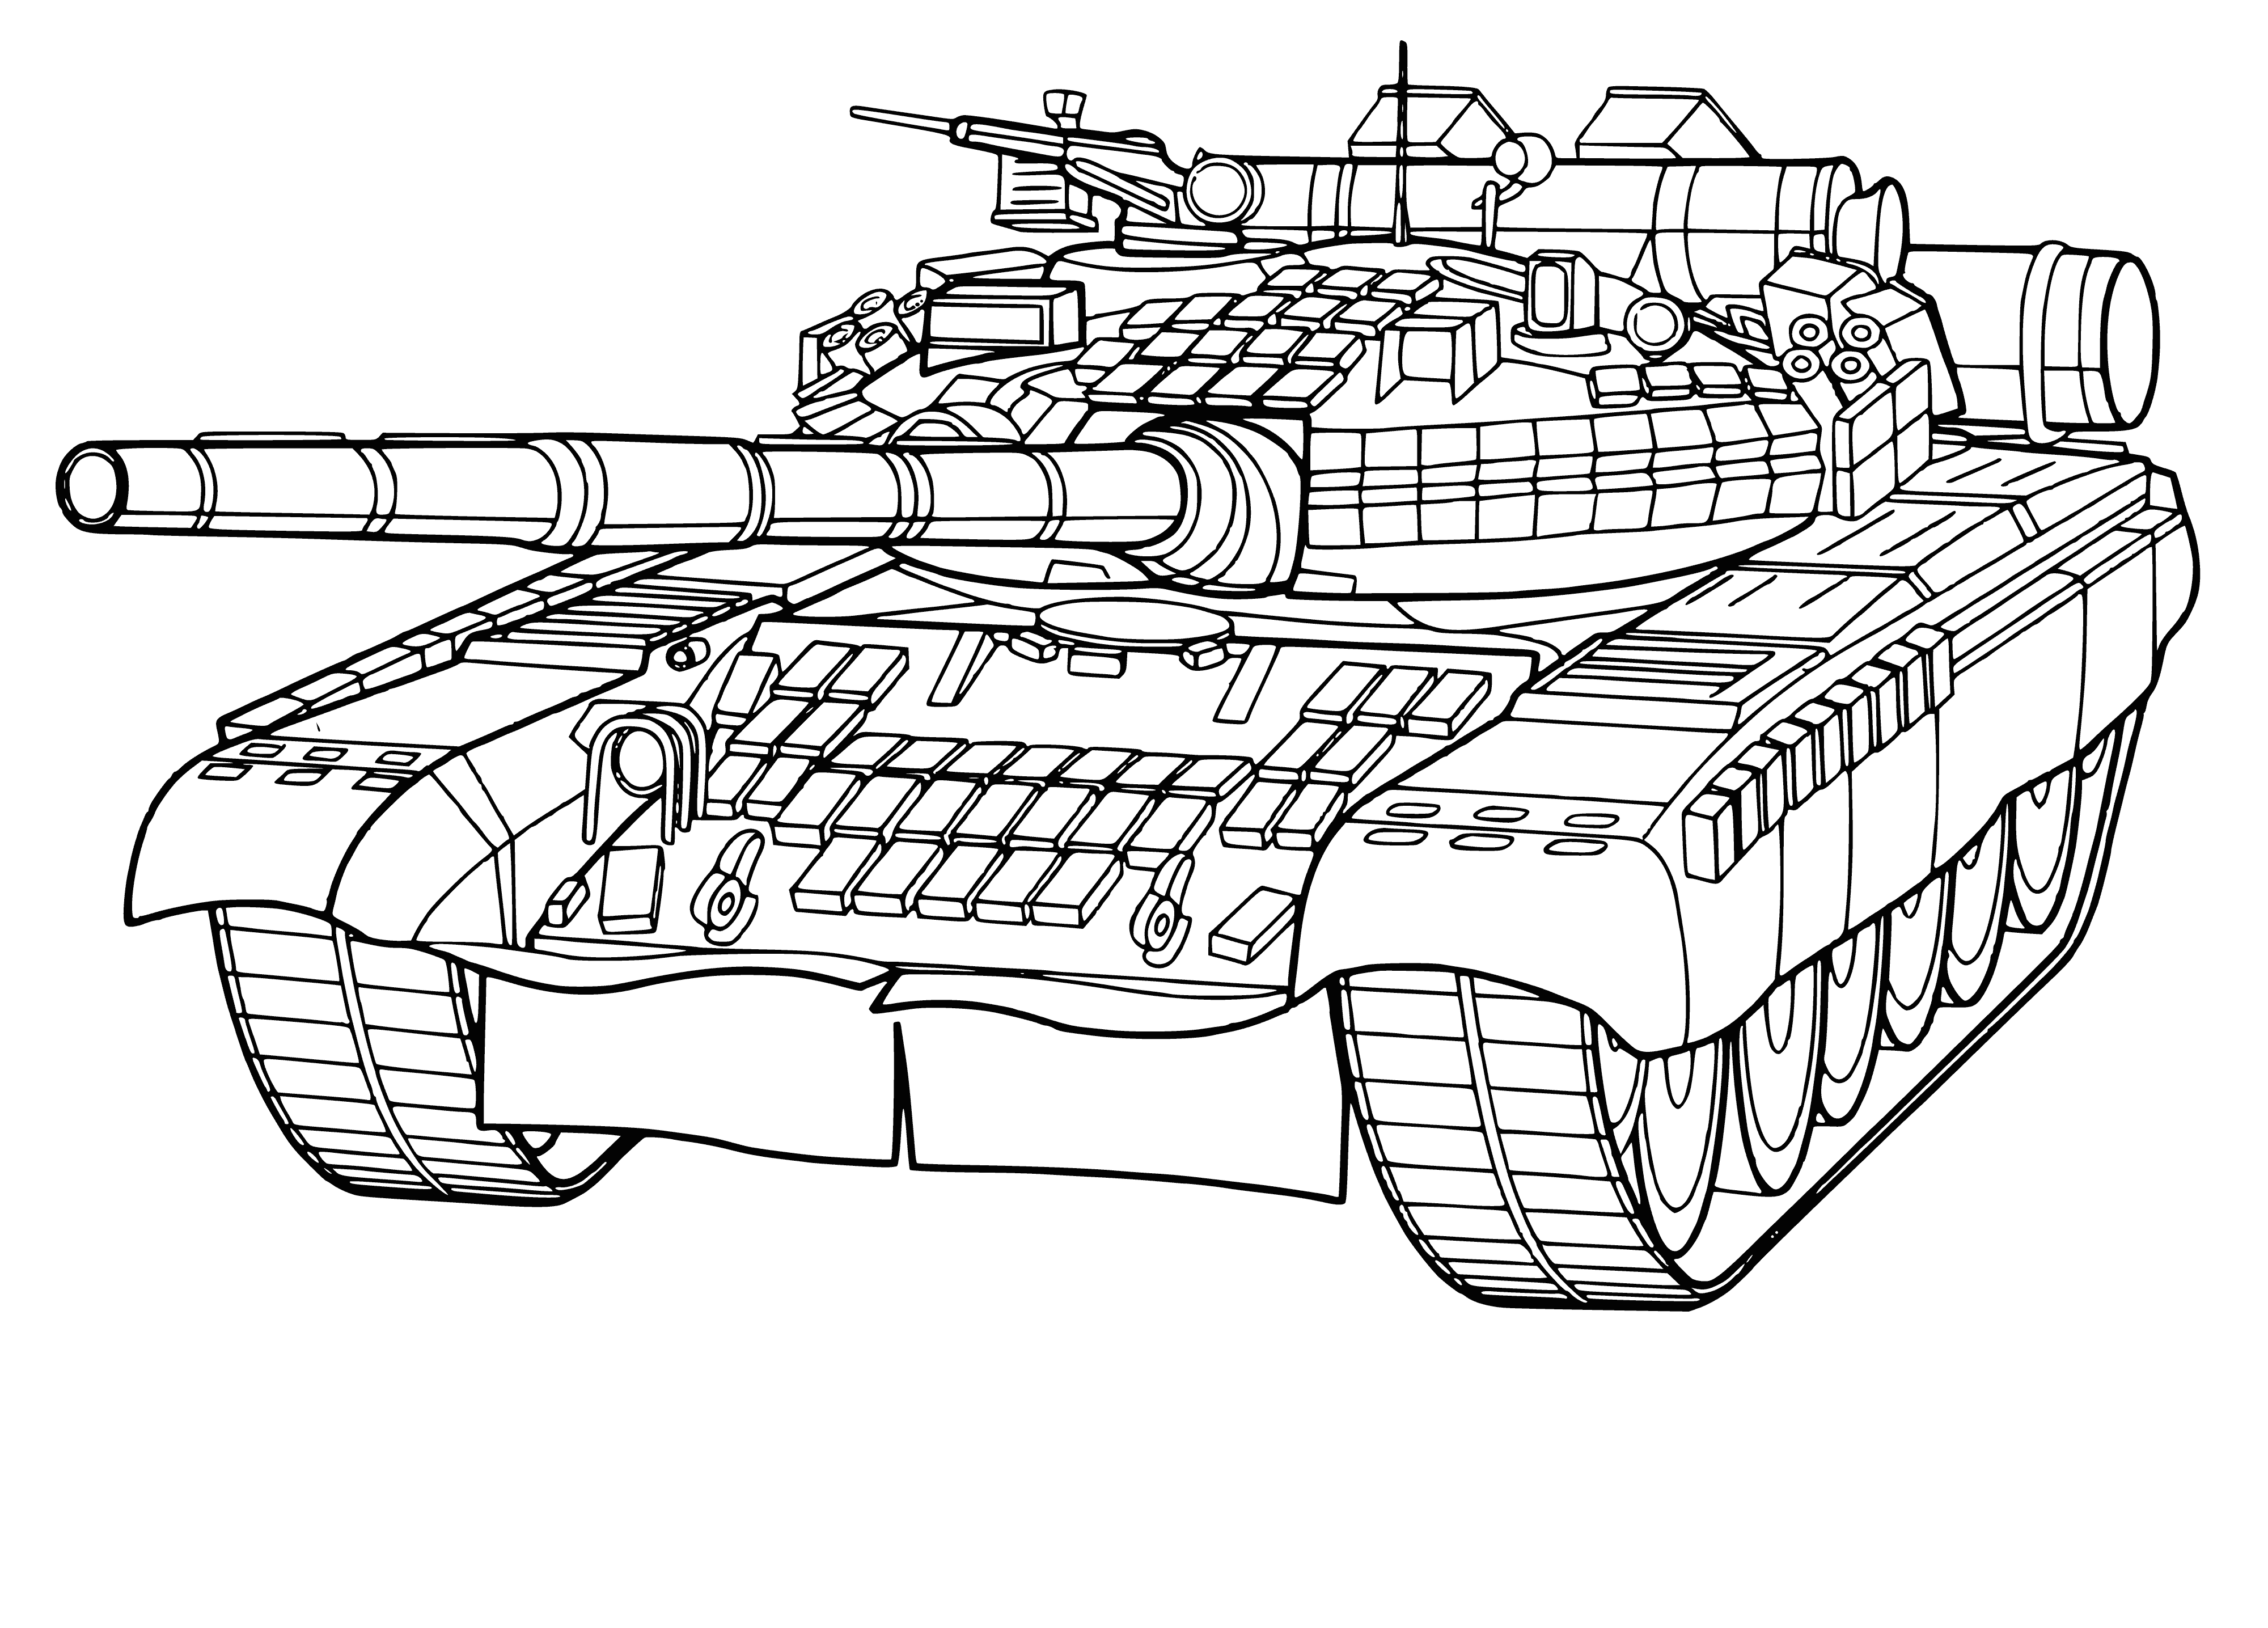 coloring page: Large tank on dirt road in rural area. Green w/ white accents, turret w/ gun barrel, several large wheels. #tanks #military #rural